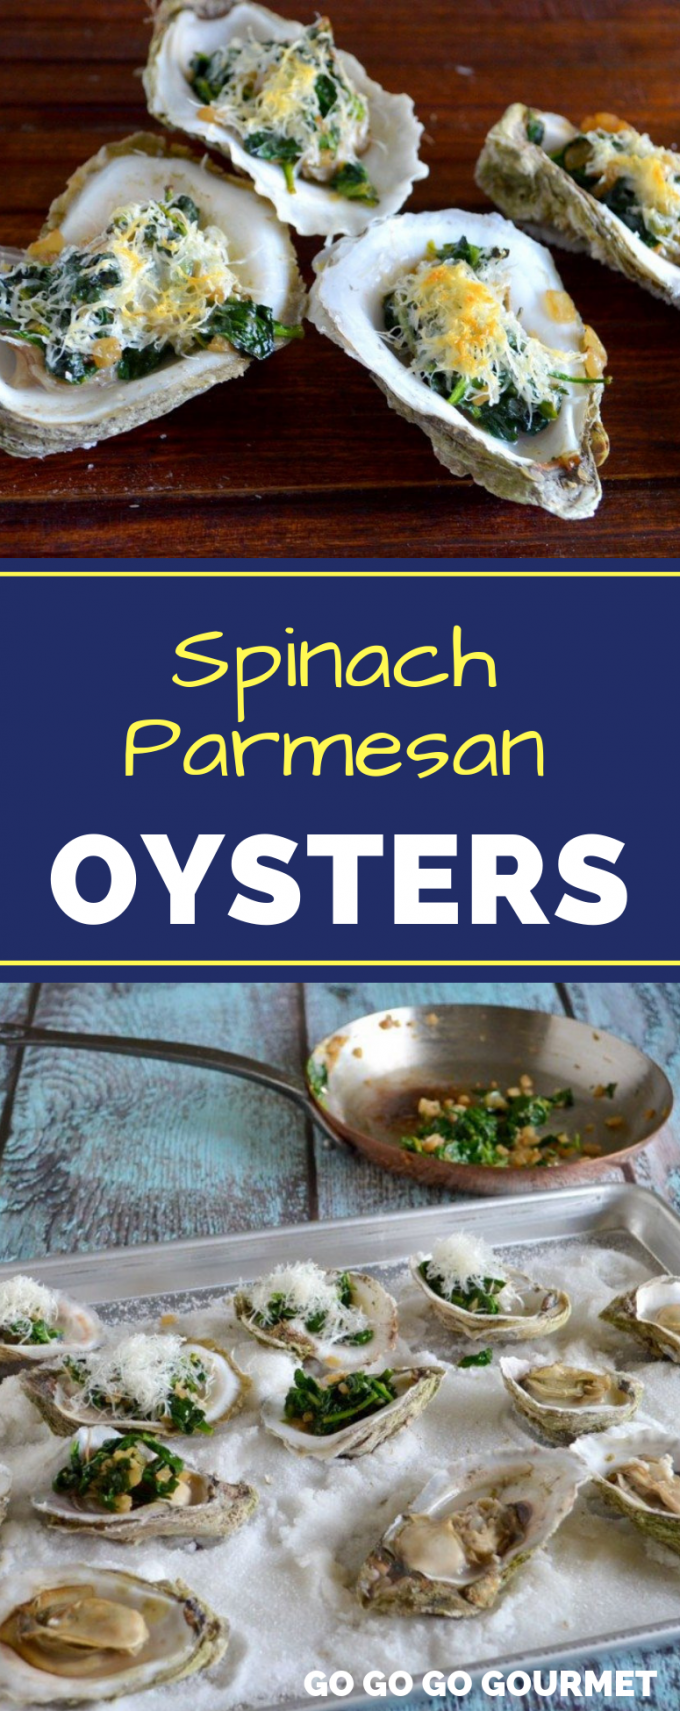 This Spinach Parmesan Oysters recipe is filled with garlic and delicious flavor! You won't believe how easy this appetizer really is! Perfect for any summer party. #gogogogourmet #spinachparmesanoysters #parmesanoysters #garlicoysters via @gogogogourmet